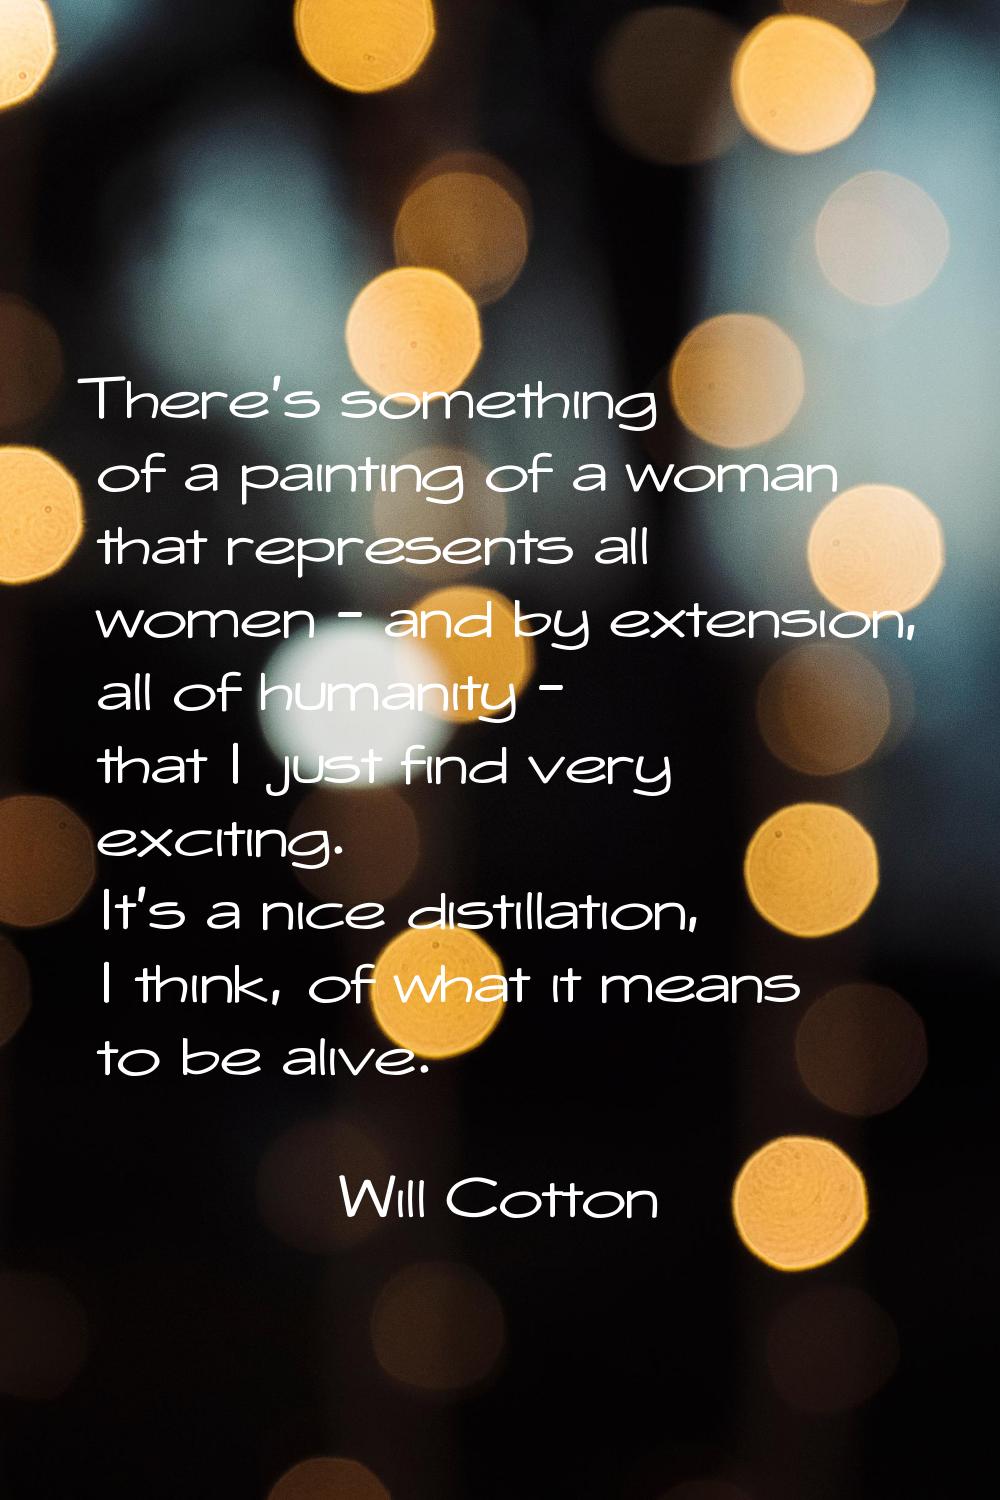 There's something of a painting of a woman that represents all women - and by extension, all of hum